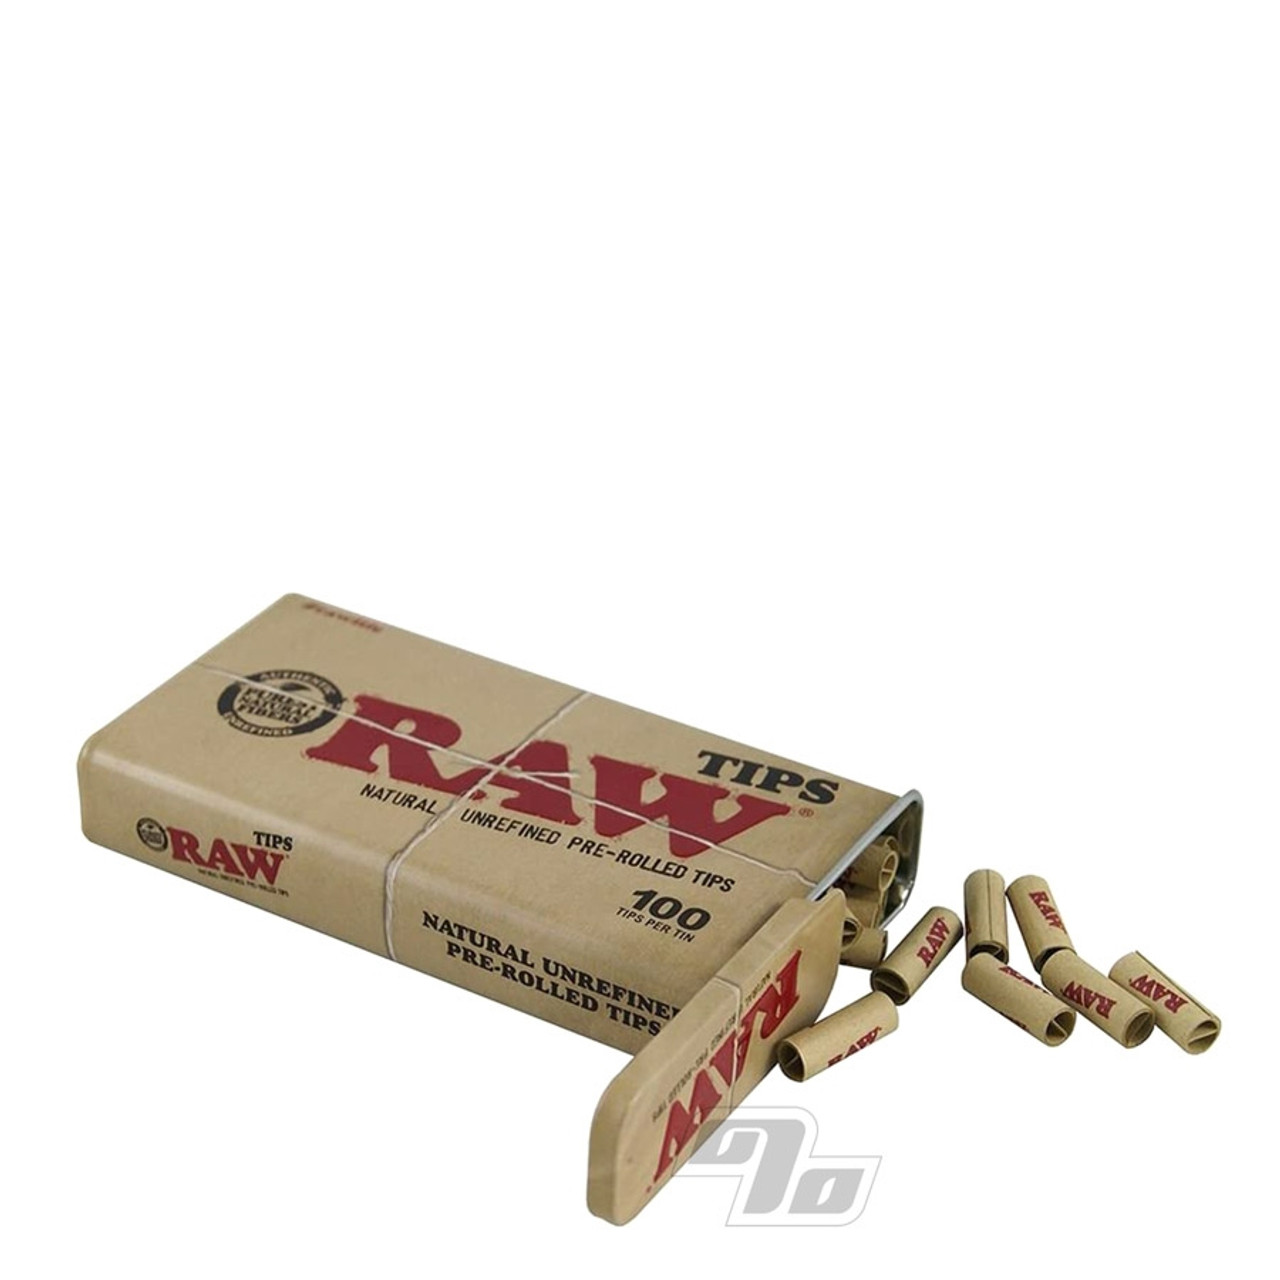 RAW PRE ROLLED FILTER TIPS TIN – 100CT – abc